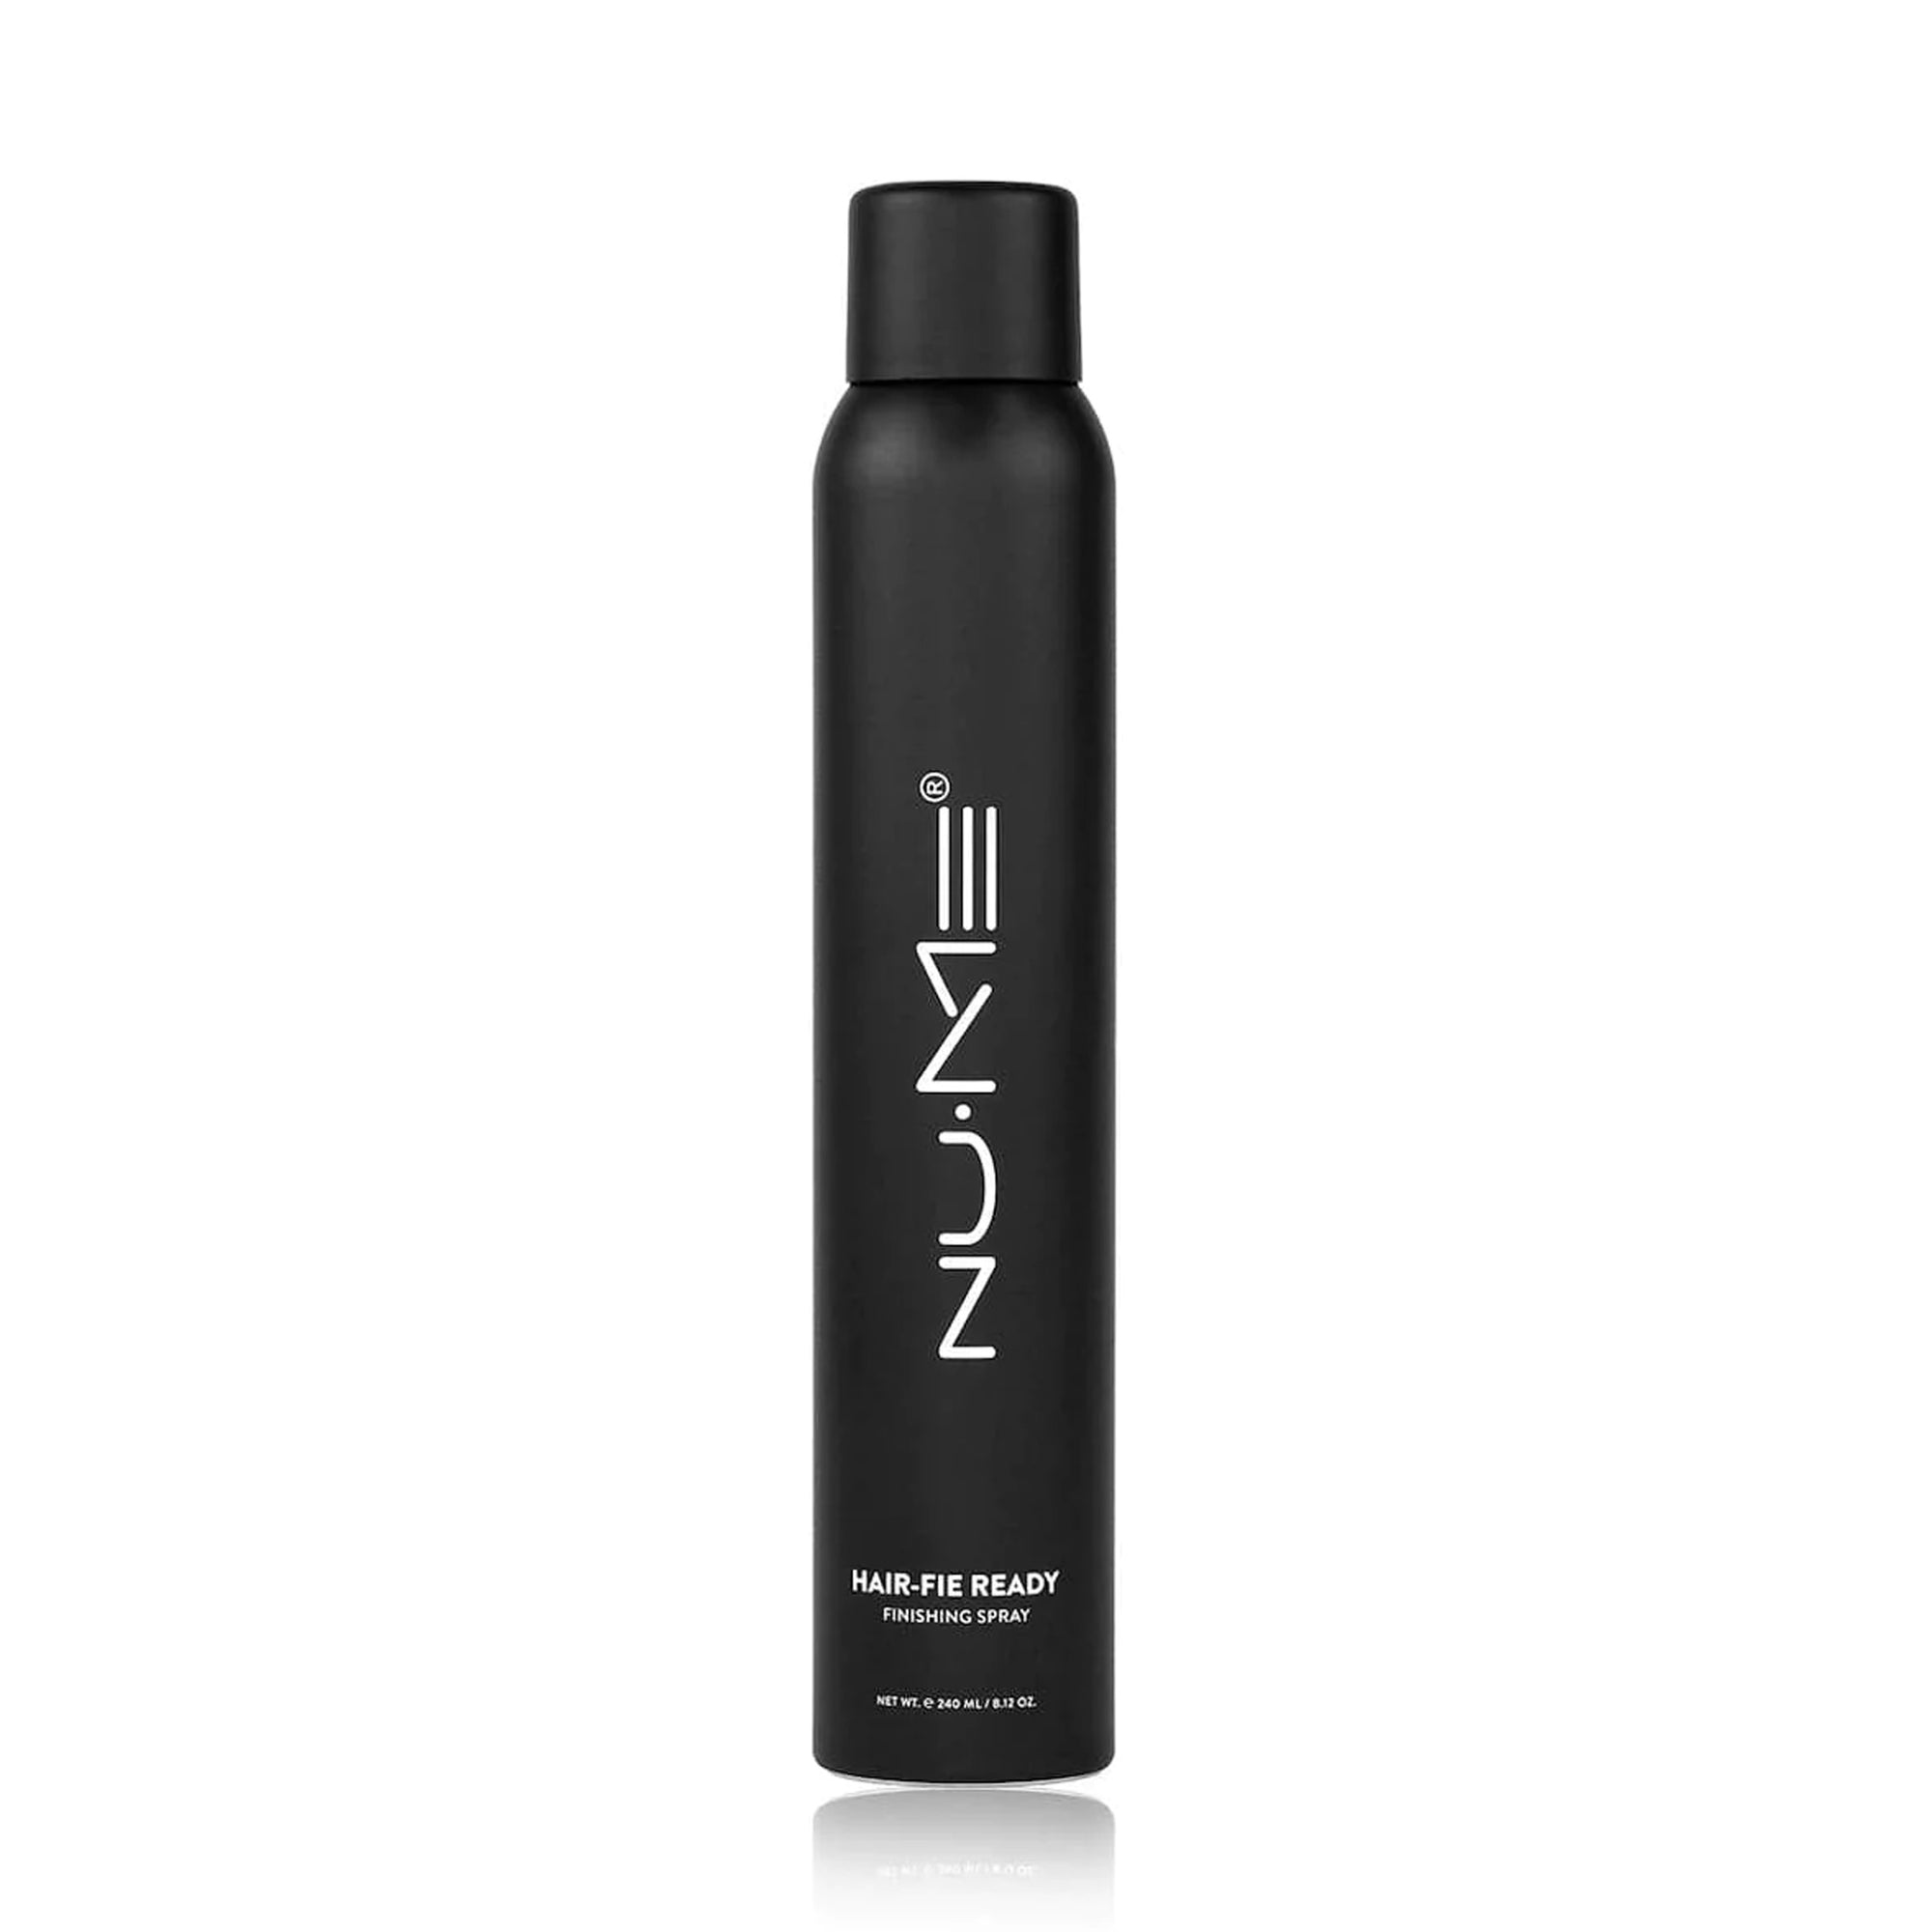 NuMe Hair-Fie Ready - Humidity Resistant Finishing and Shine Hairspray